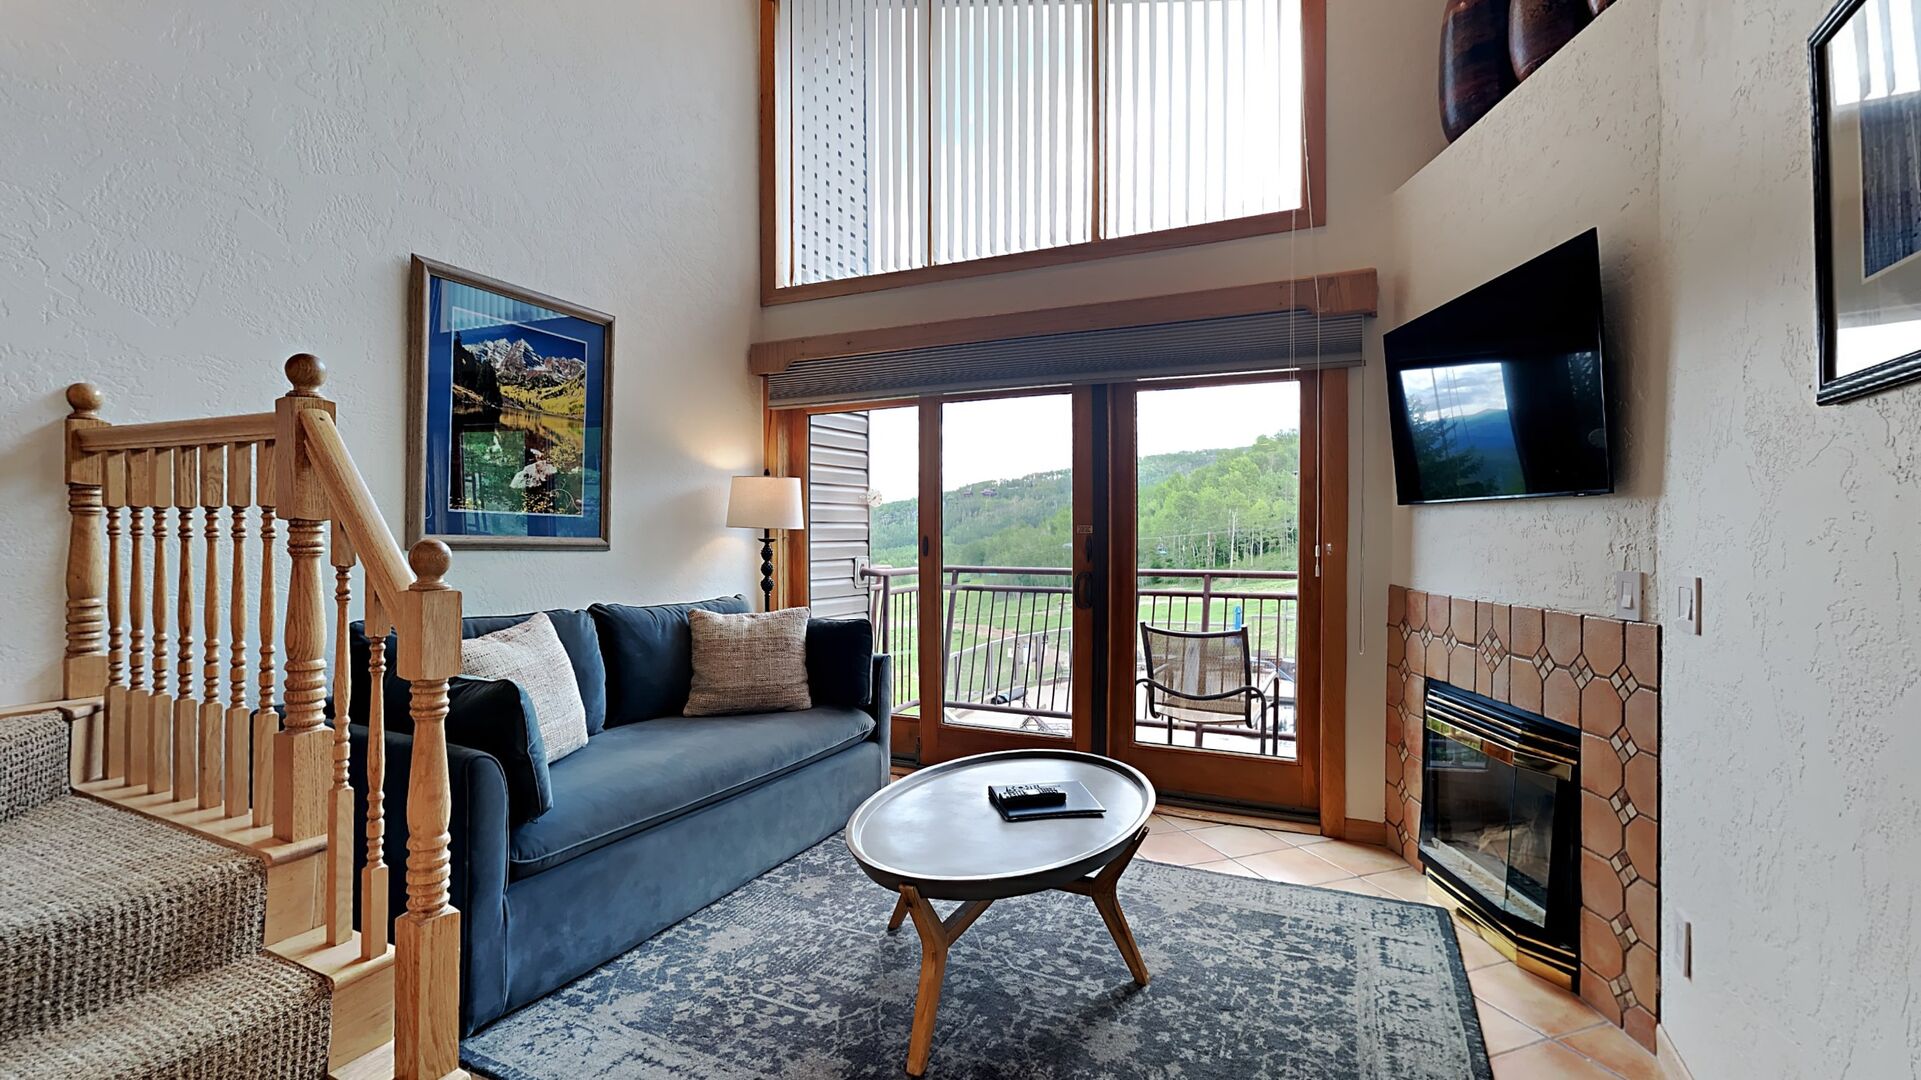 The interior of one of our Snowmass rentals with a fireplace